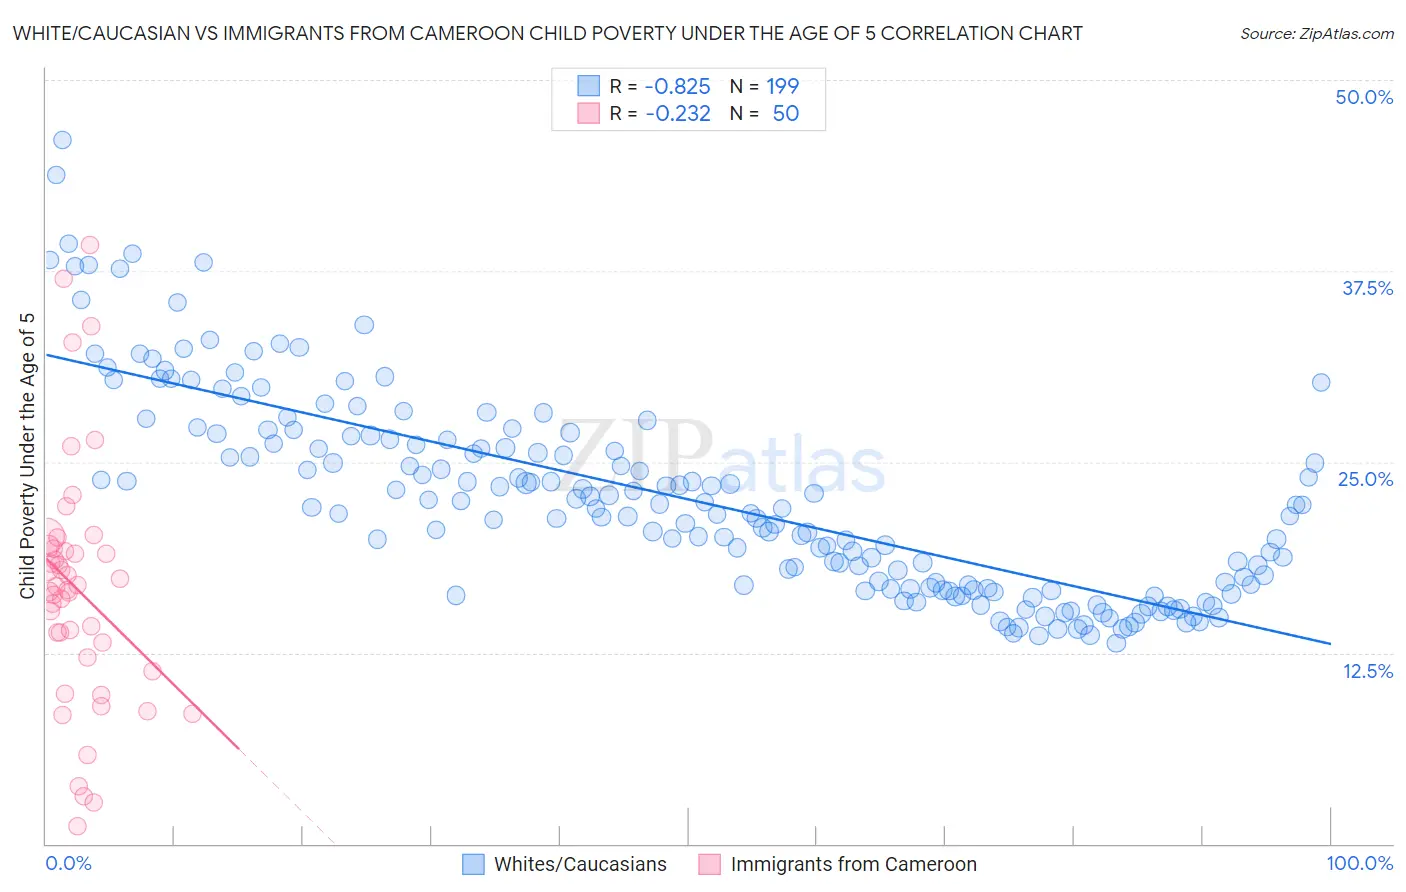 White/Caucasian vs Immigrants from Cameroon Child Poverty Under the Age of 5